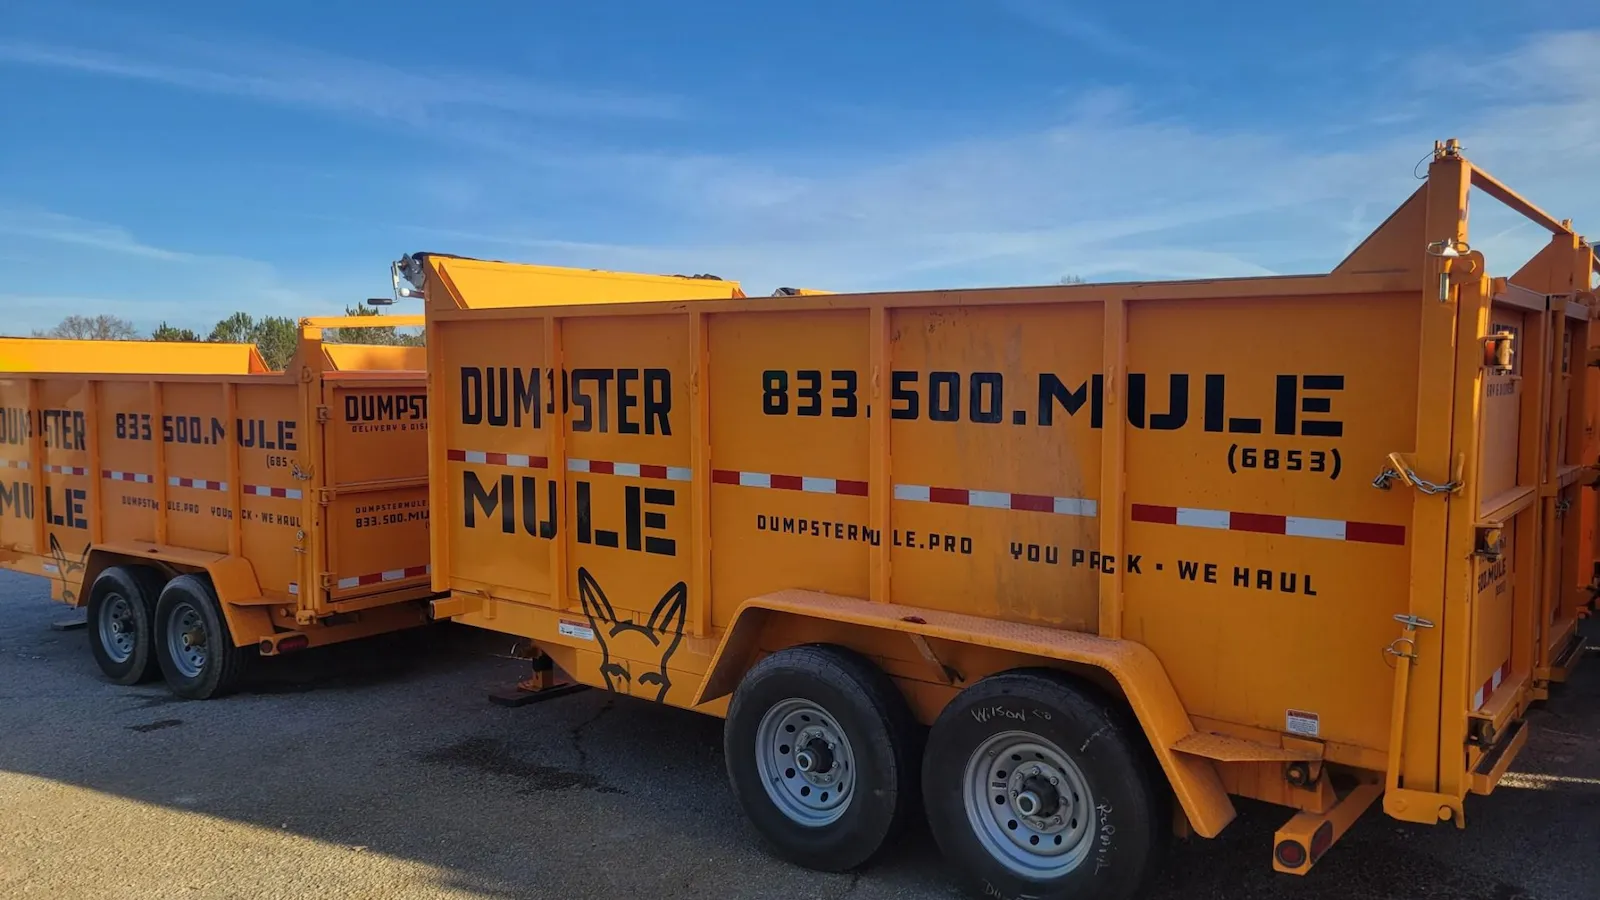 5 Questions to Ask Before Renting a Dumpster - Dumpster Mule